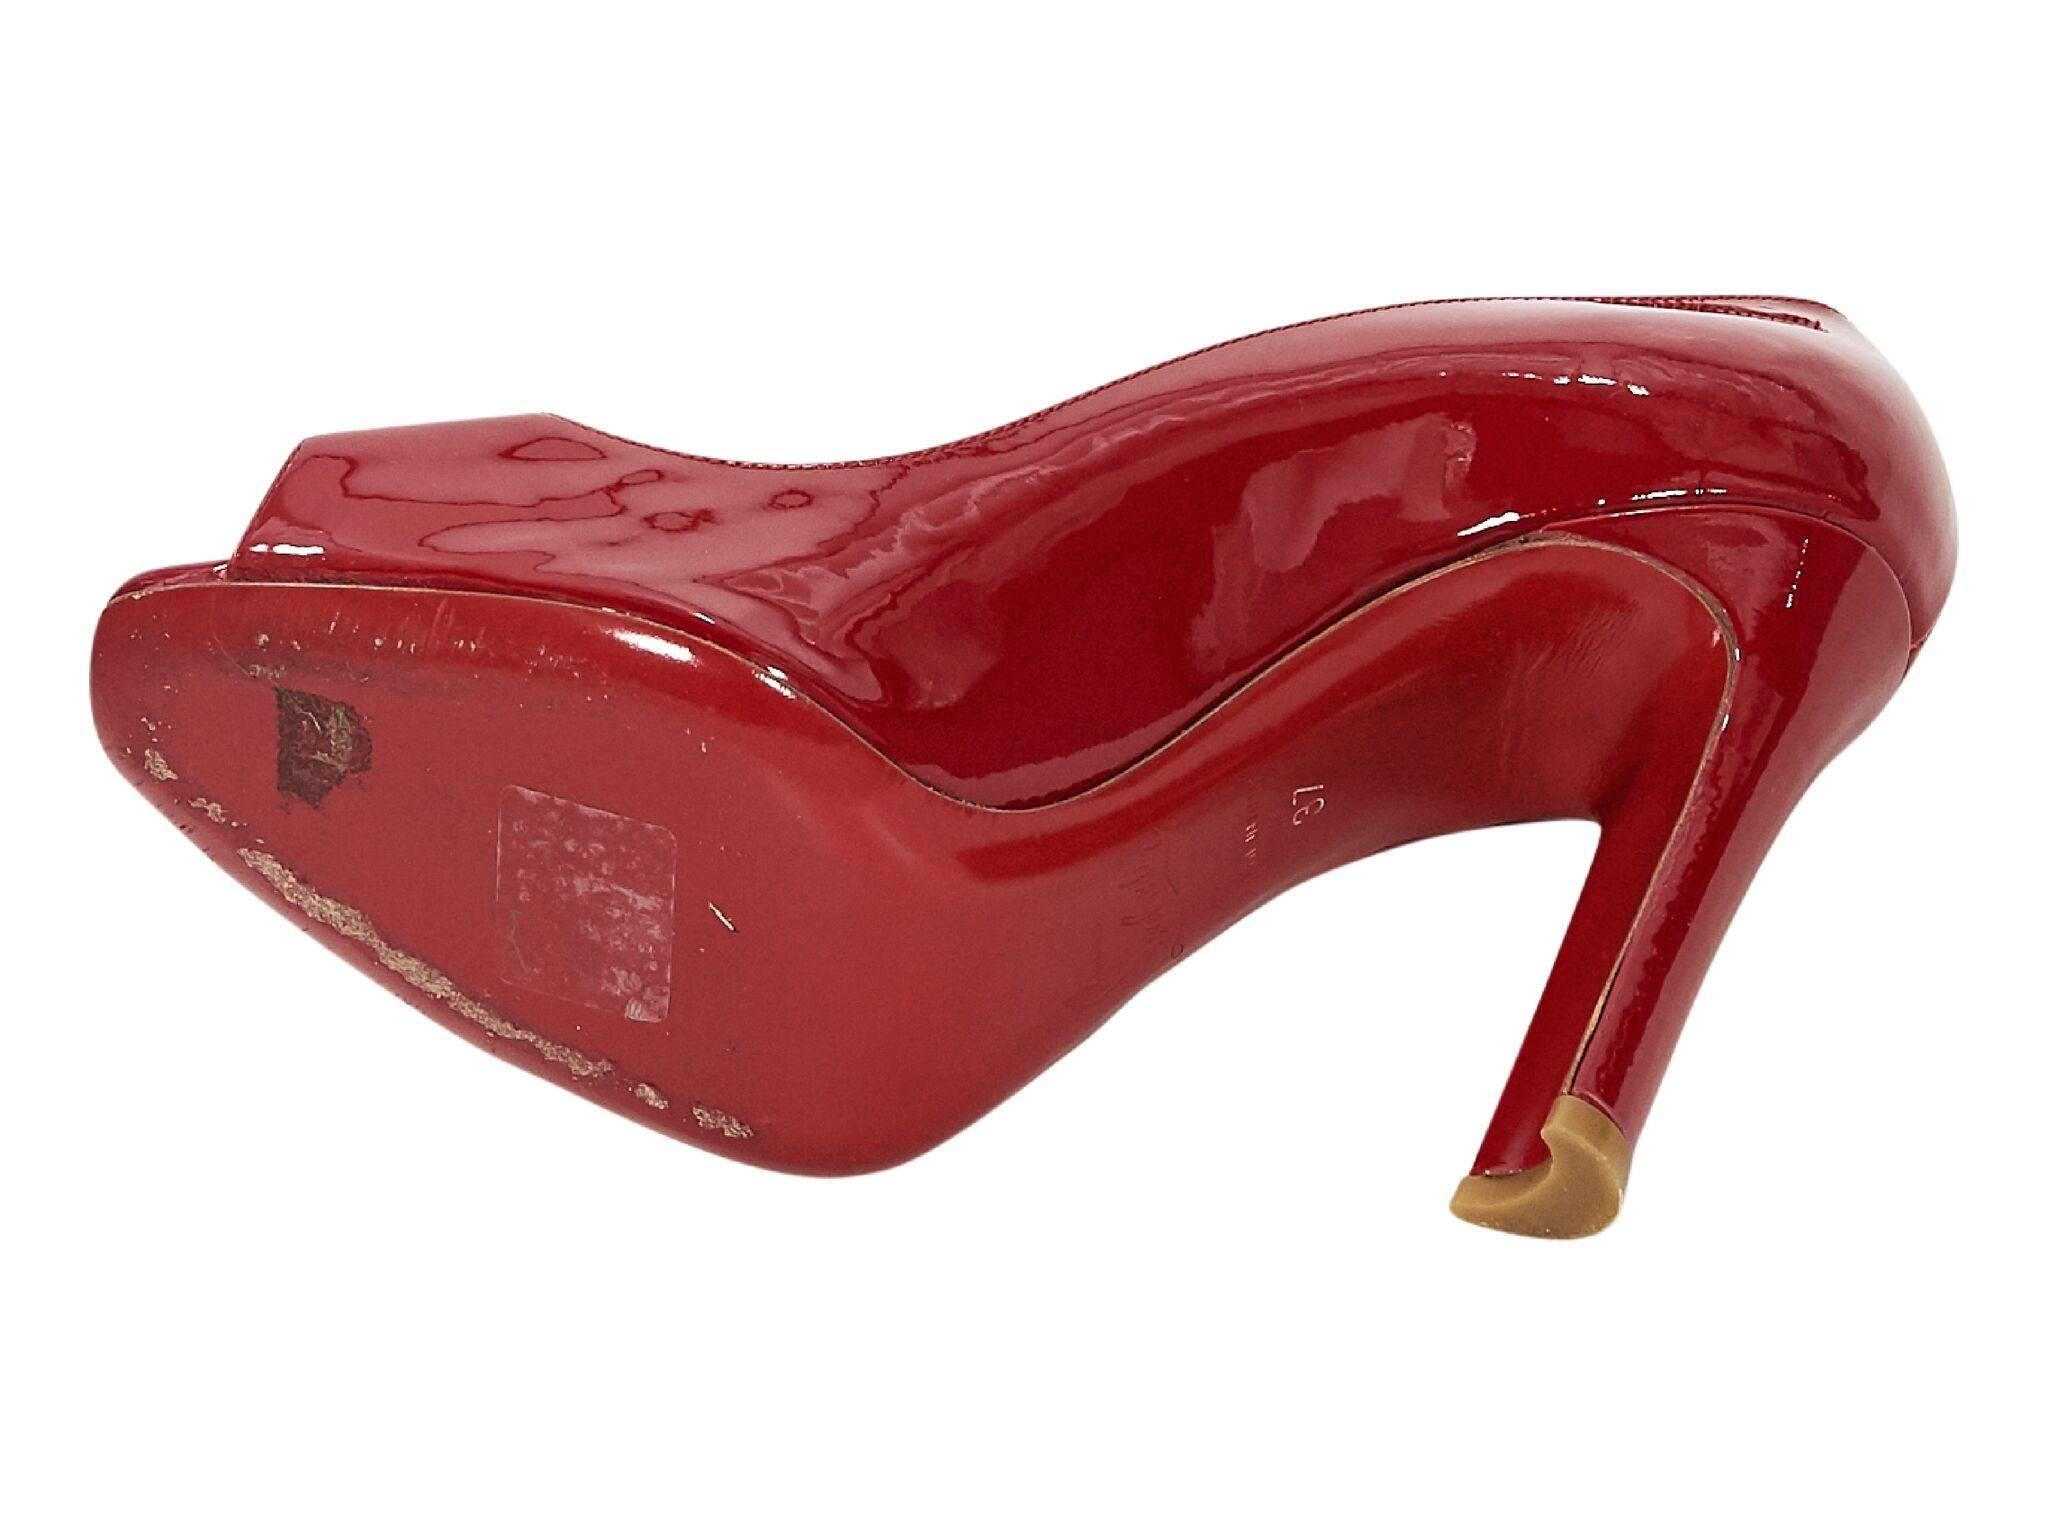 Women's Red Christian Louboutin Patent Leather Pumps